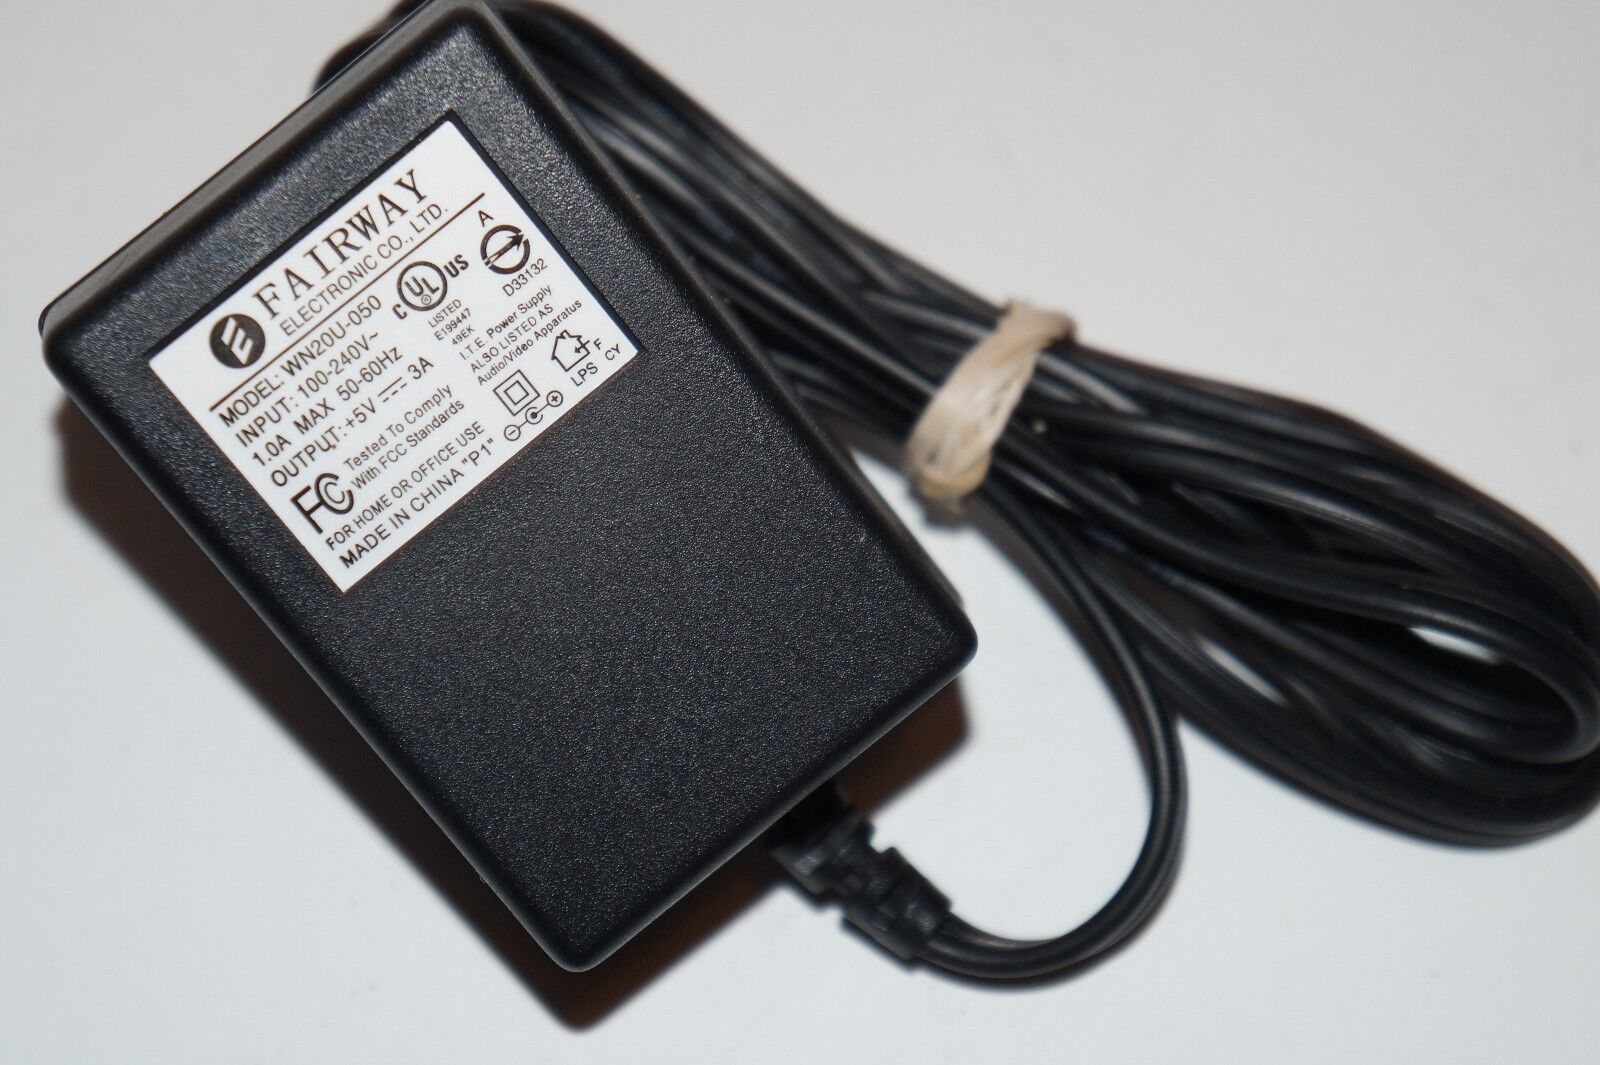 AC DC Power Adapter for Fairway WRG2-F-050A 5V 3000mA 3A 5.5mm Plug Tip Center+ Specifications: Type: AC to DC Standard - Click Image to Close